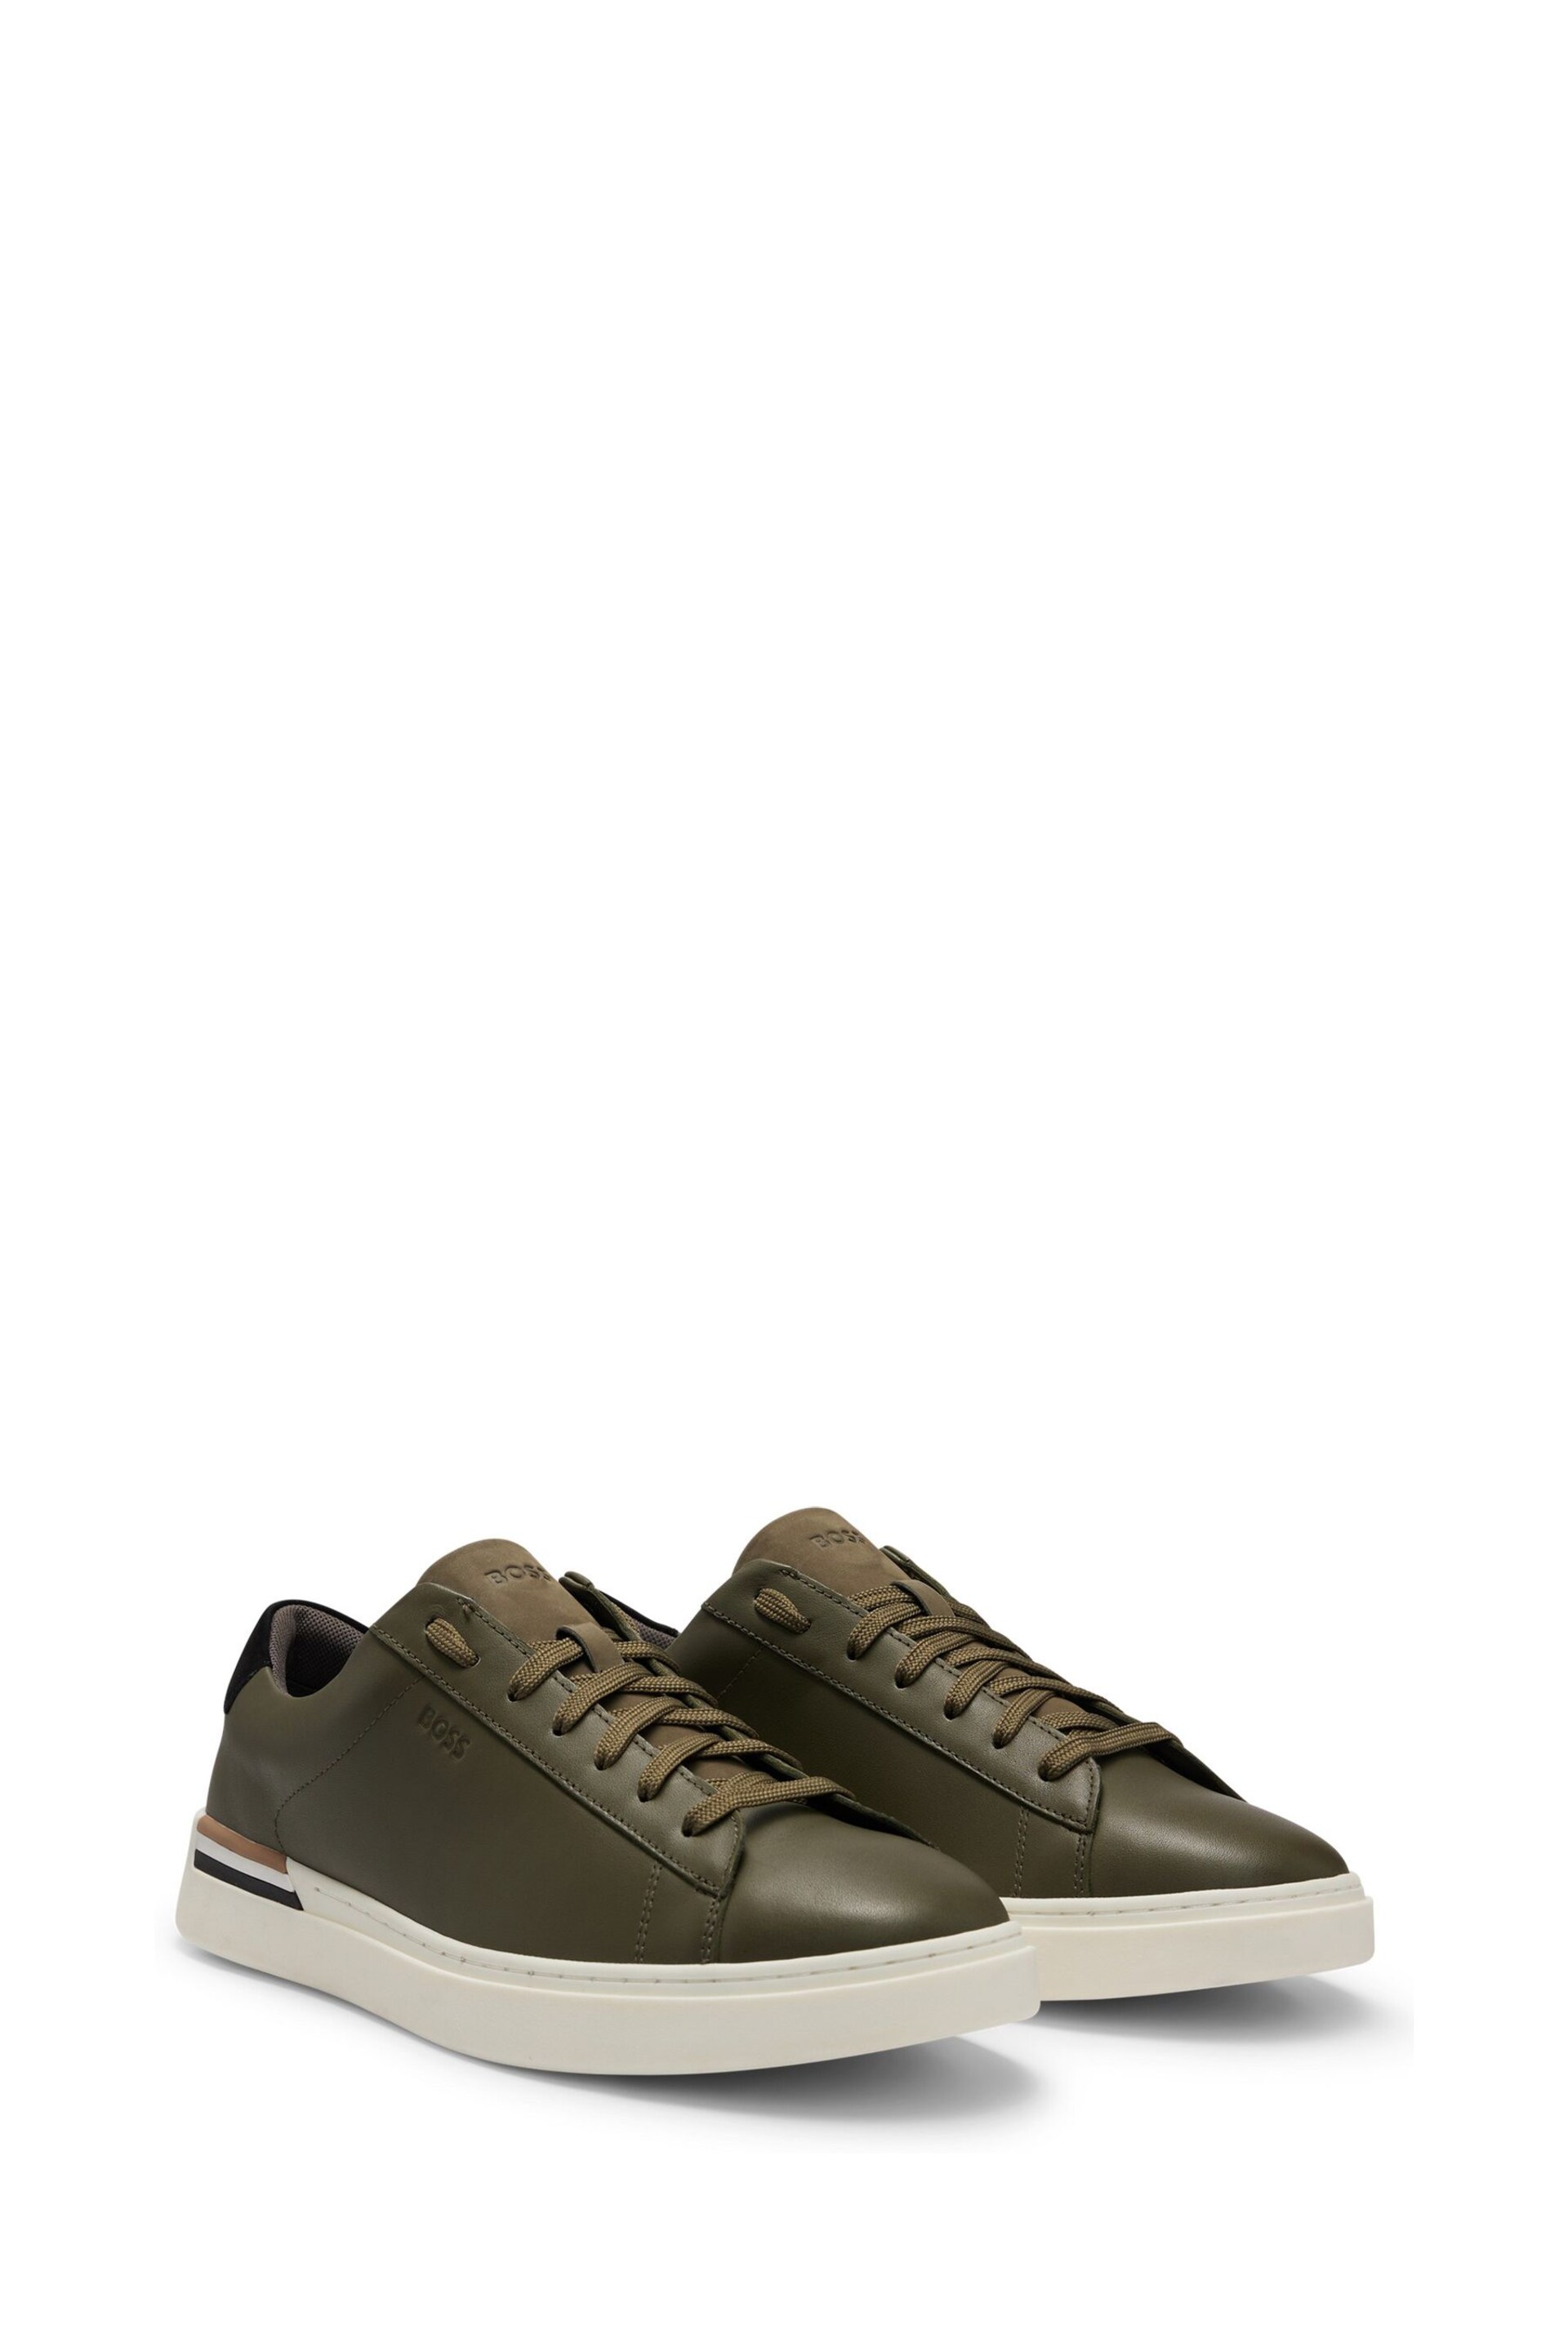 BOSS Green Clint Cupsole Lace Up Leather Trainers - Image 2 of 4